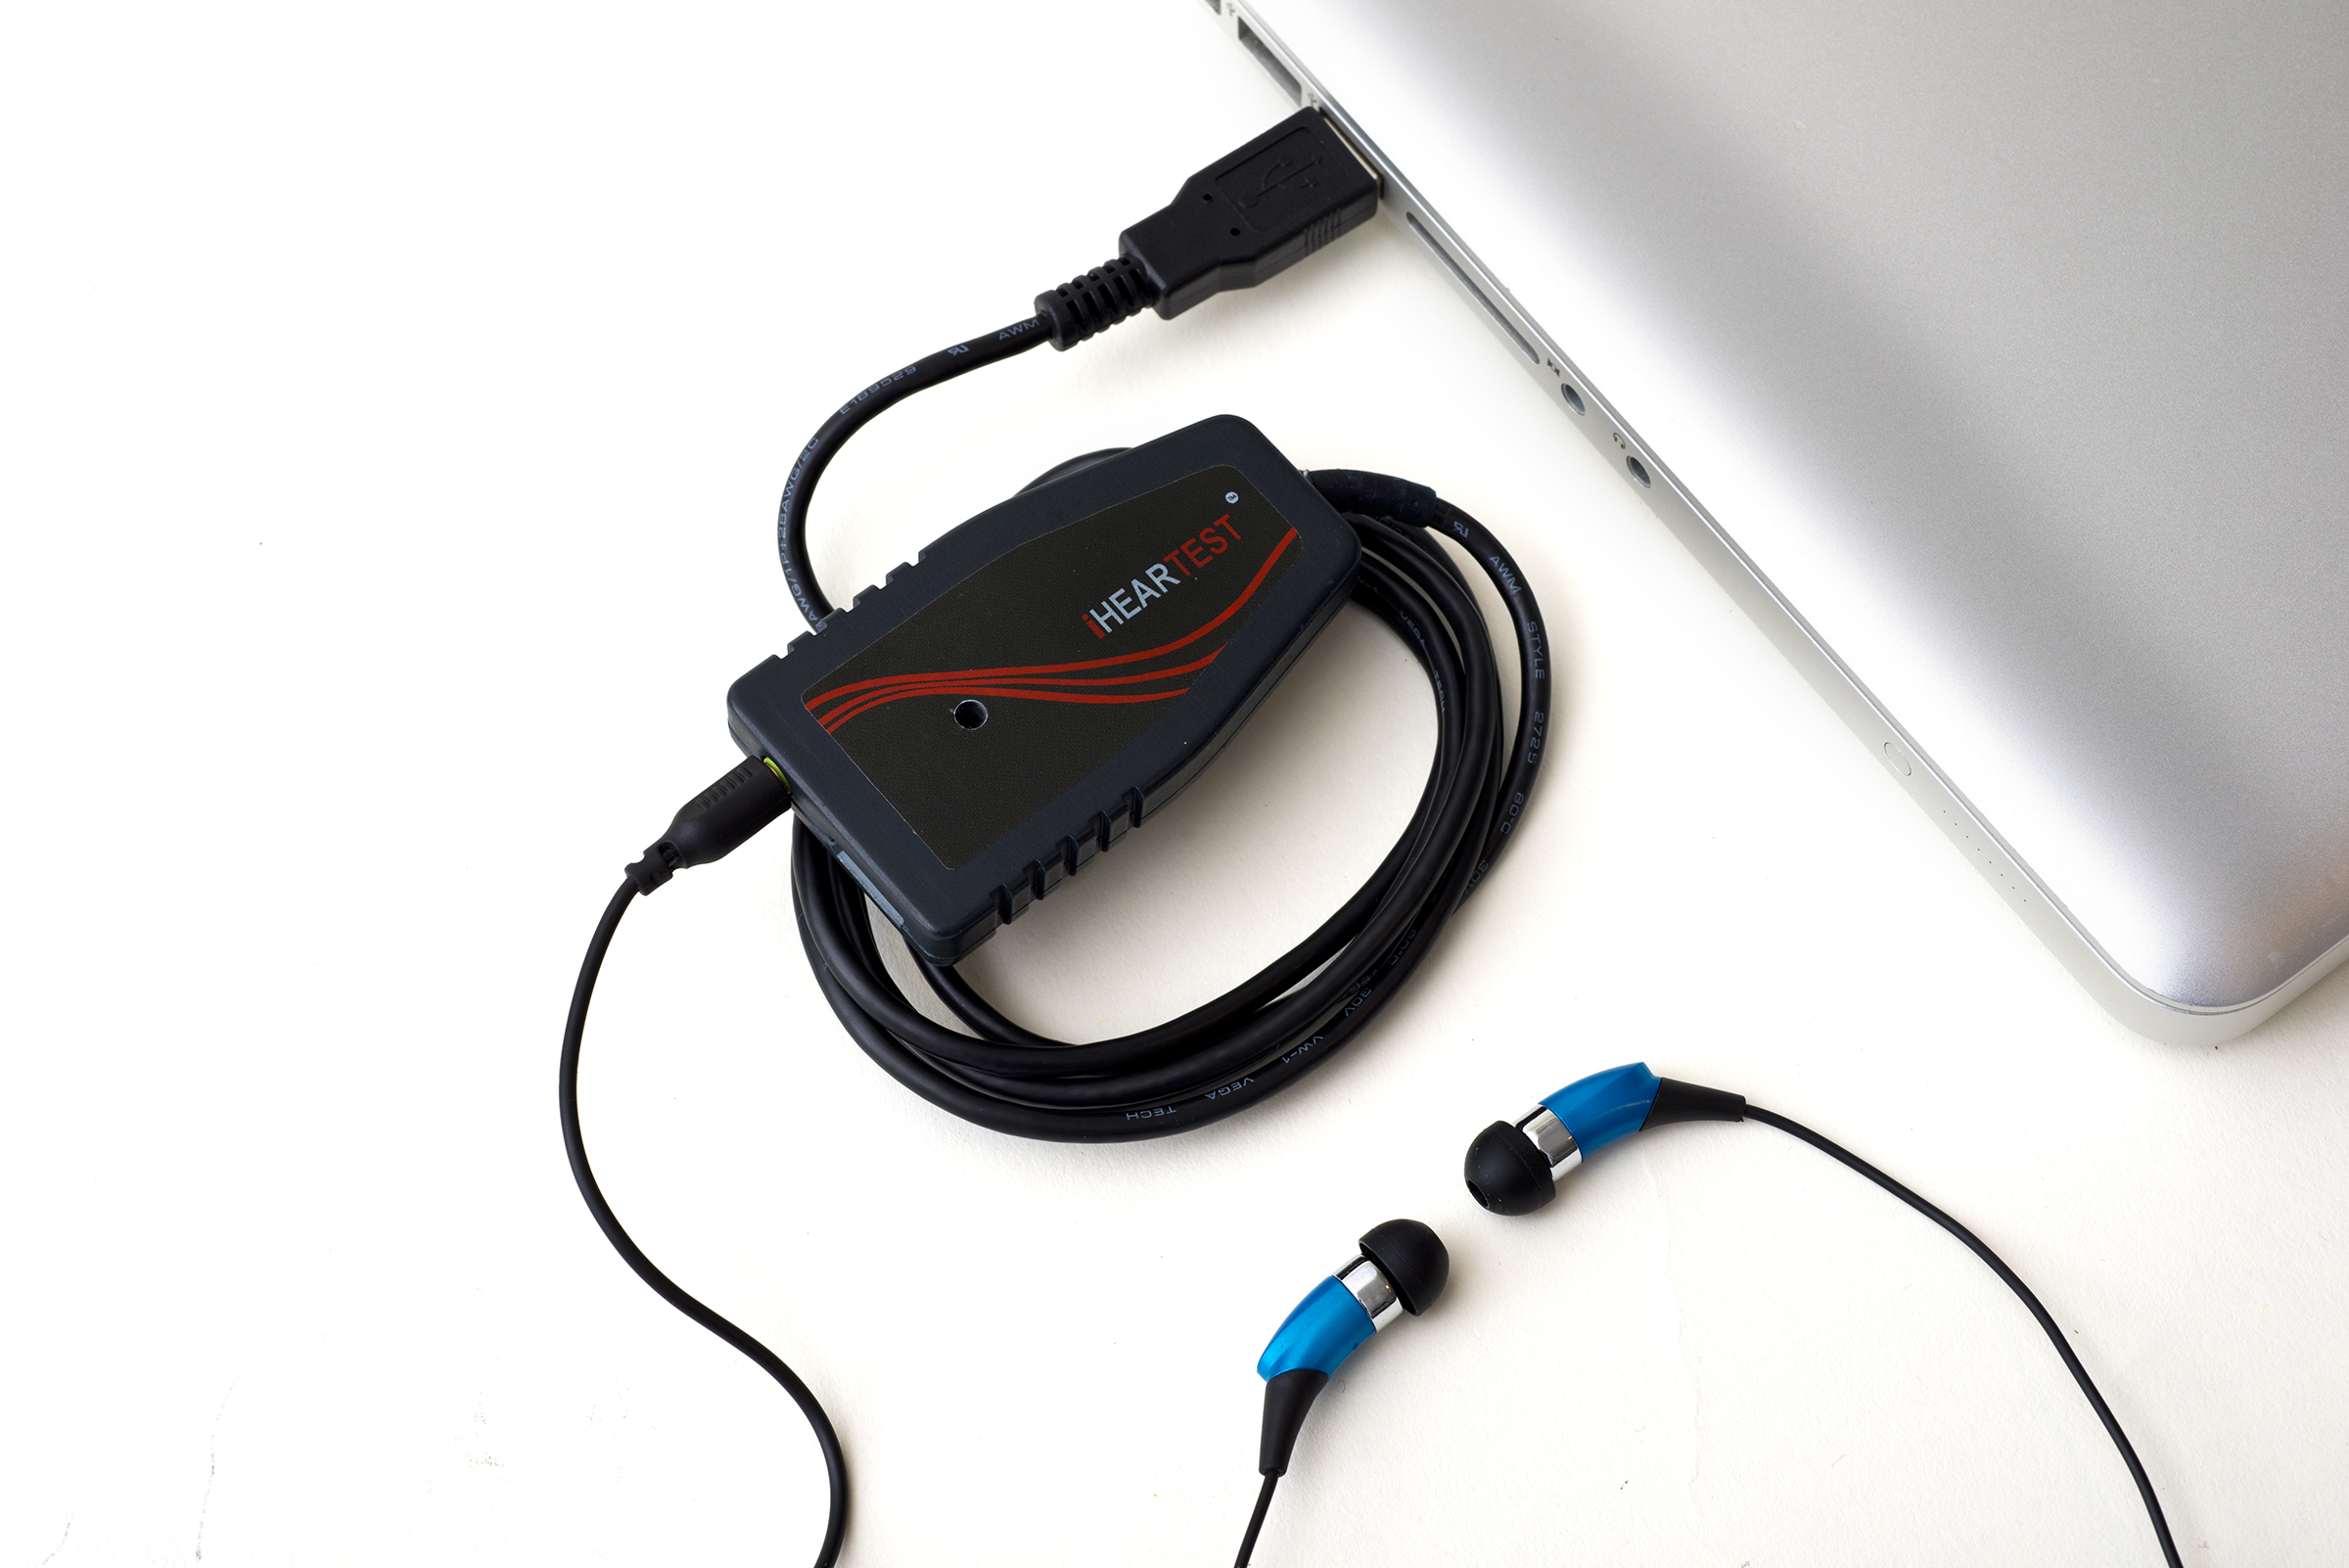 iHearTest kit plugs into the USB port of PC or Mac and is easy to use with iHear's online Web-enabled hearing test.